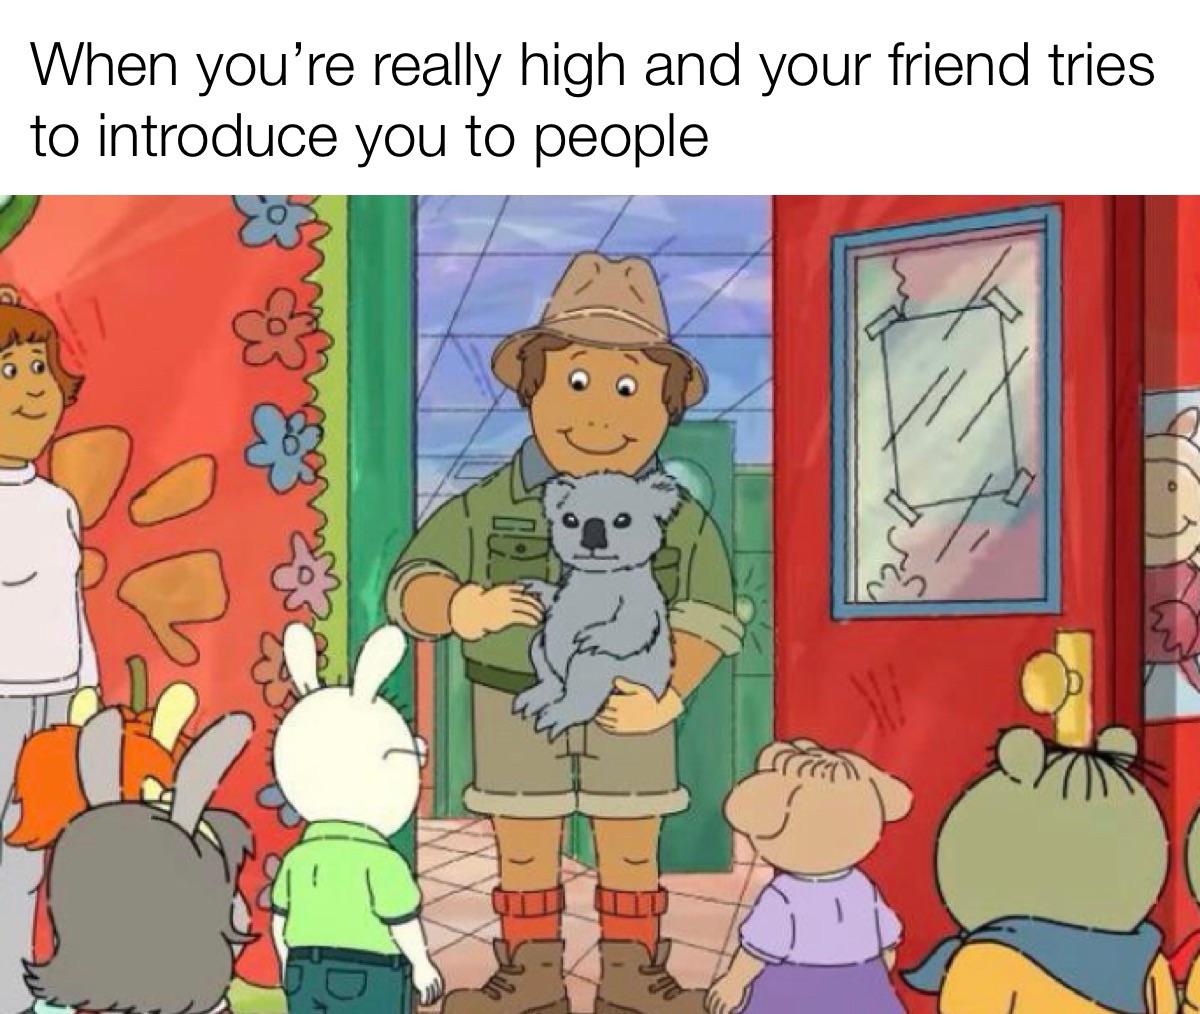 dank memes - funny memes - cartoon - When you're really high and your friend tries to introduce you to people